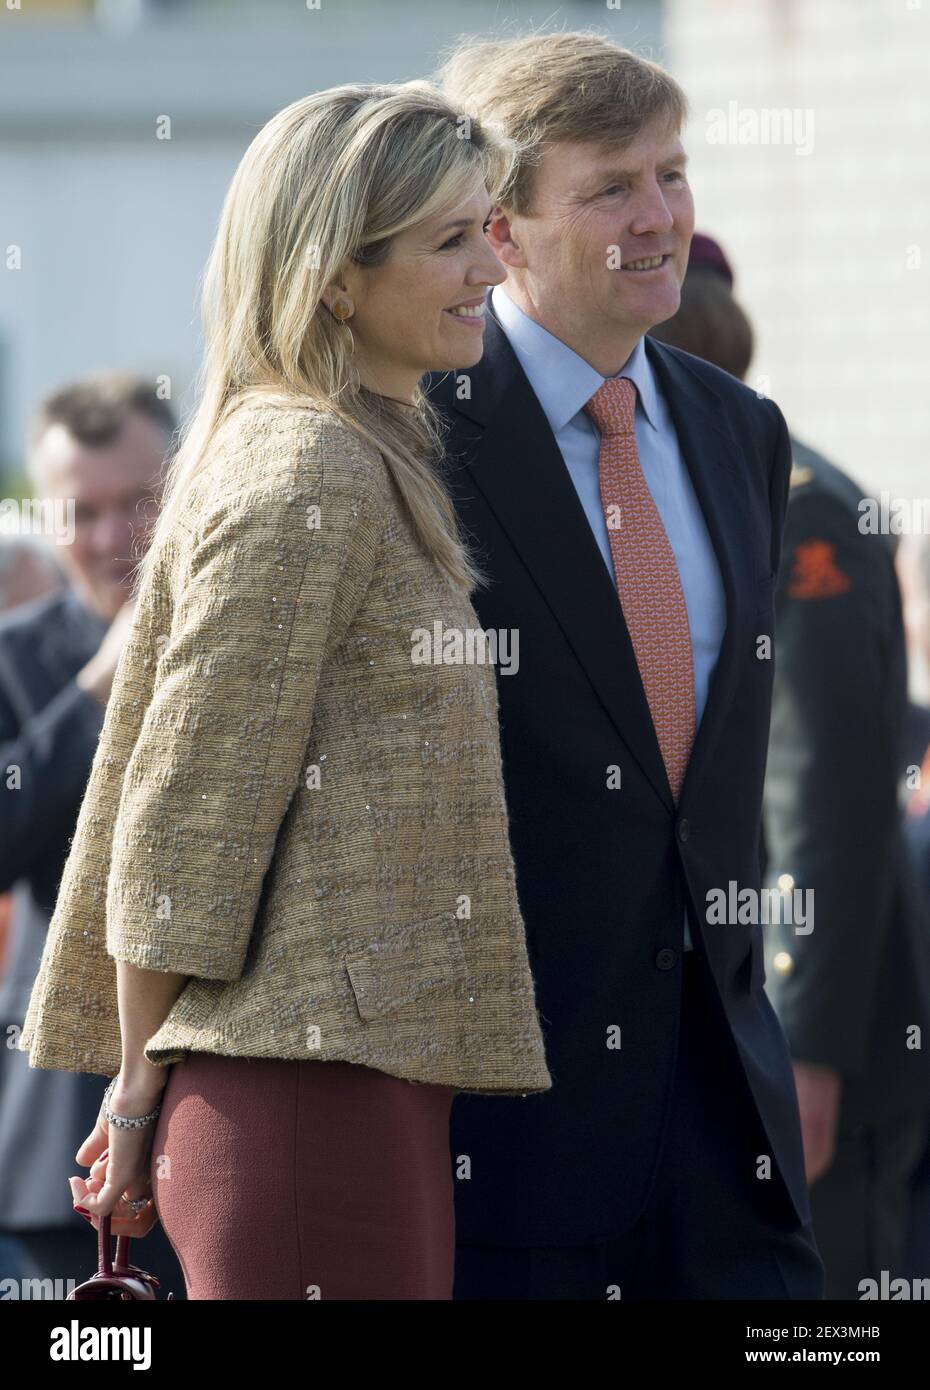 24-4-2015 LEIDEN - Kingdaygames with King Willem Alexander and Queen Maxima  . King Willem-Alexander and Her Majesty Queen MÃ¡xima take part of the King  Games in Leiden. The day begins with breakfast